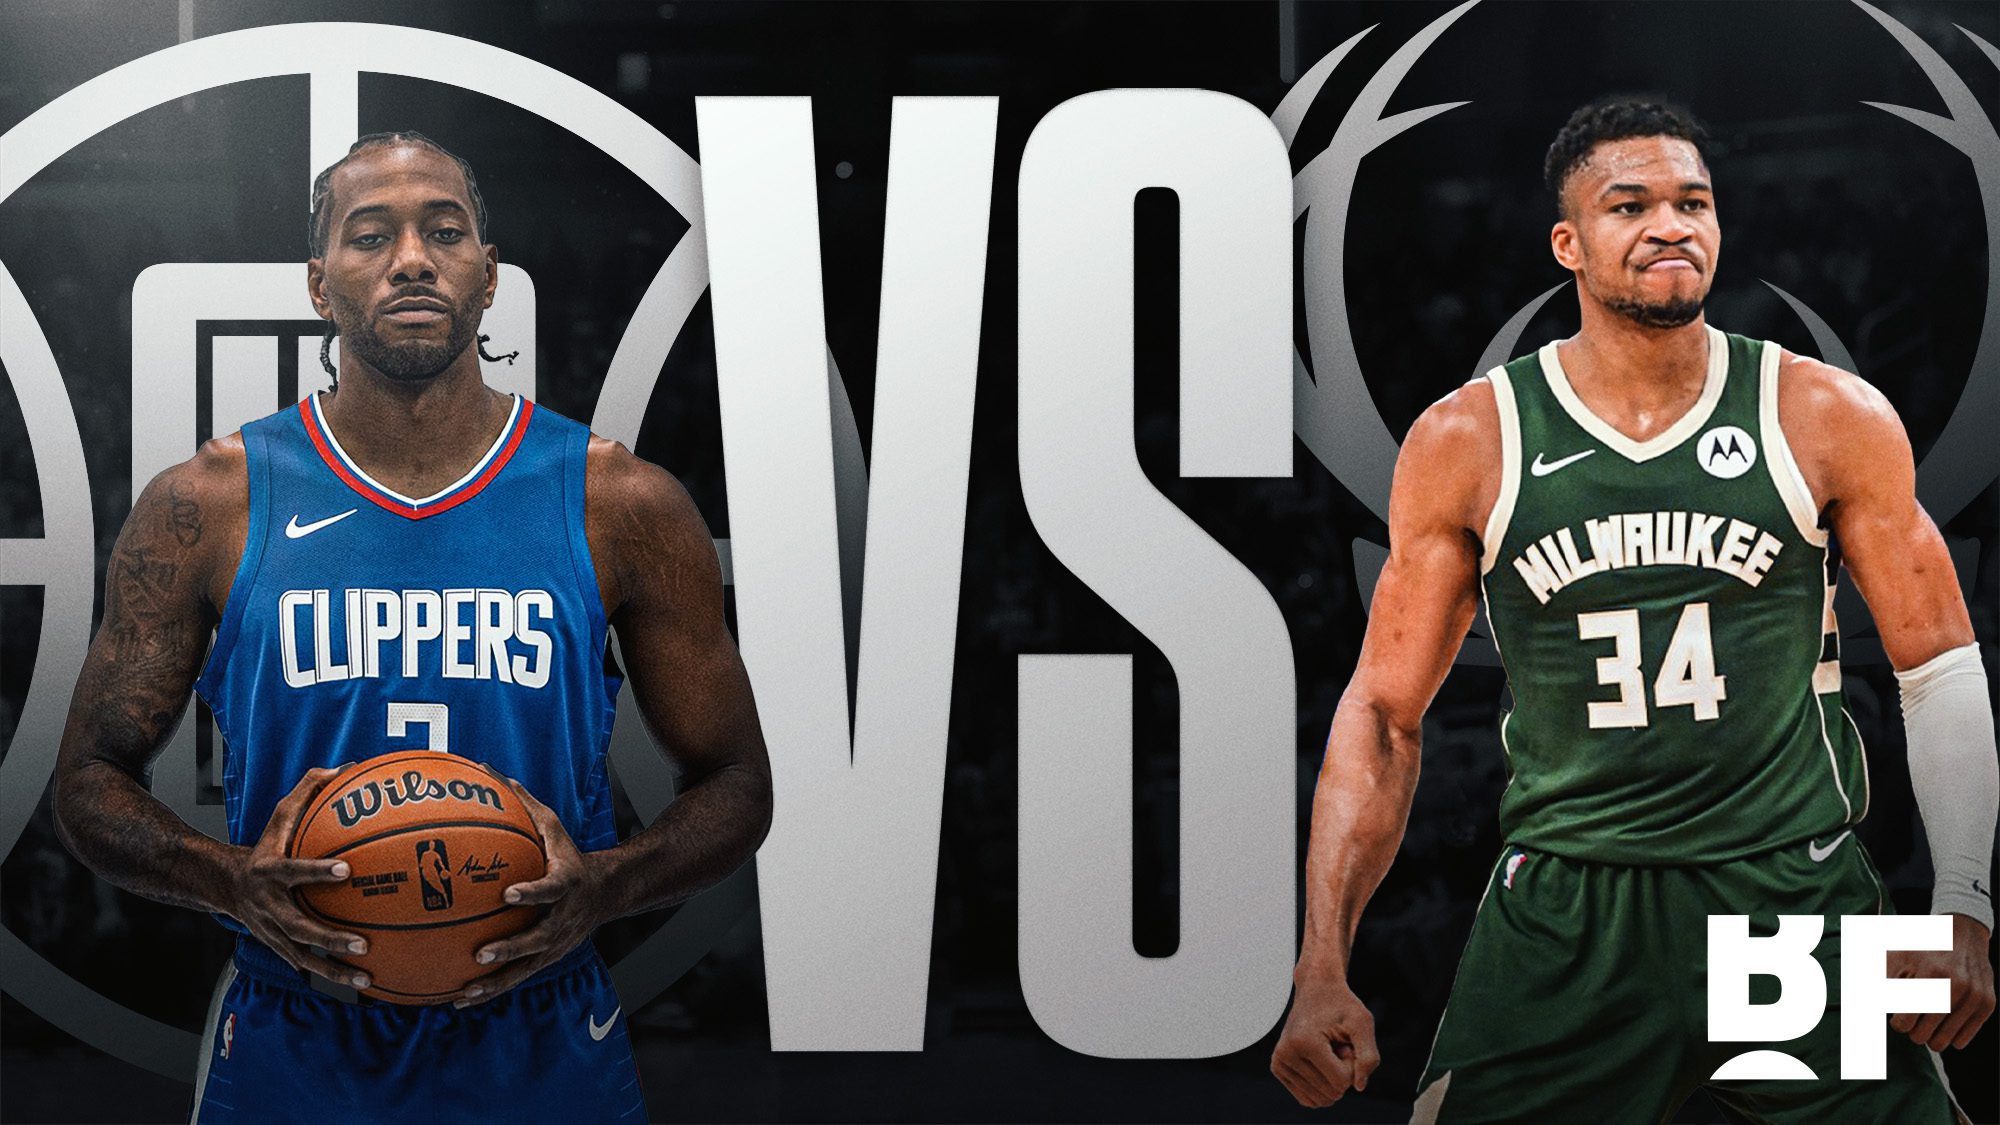 Can Giannis Antetokounmpo Control the Clippers?